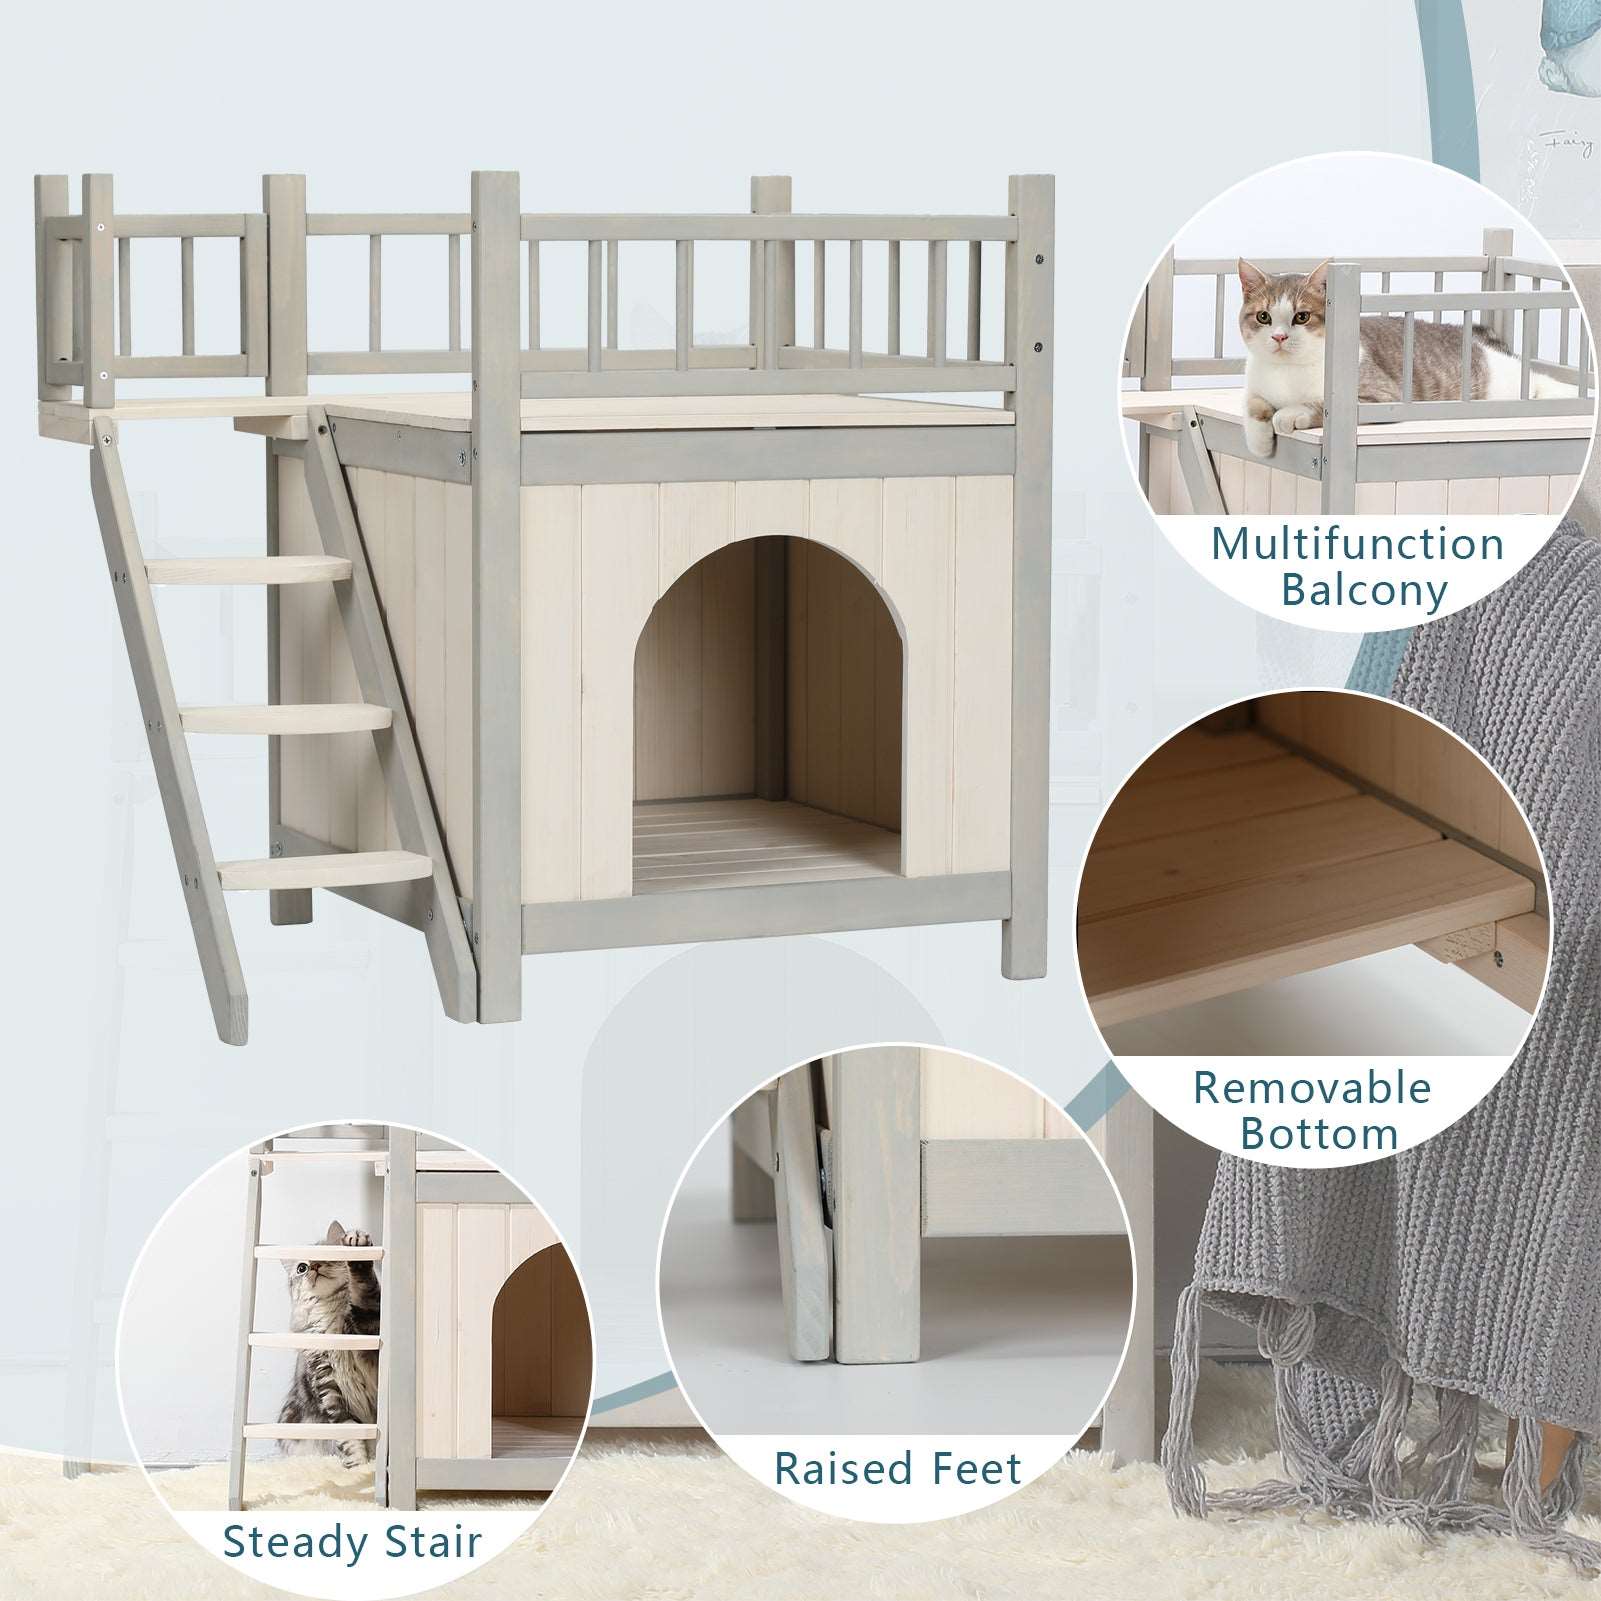 Petsfit-Cats-Puppy-Small-Animal-Indoor-House-Wood-04